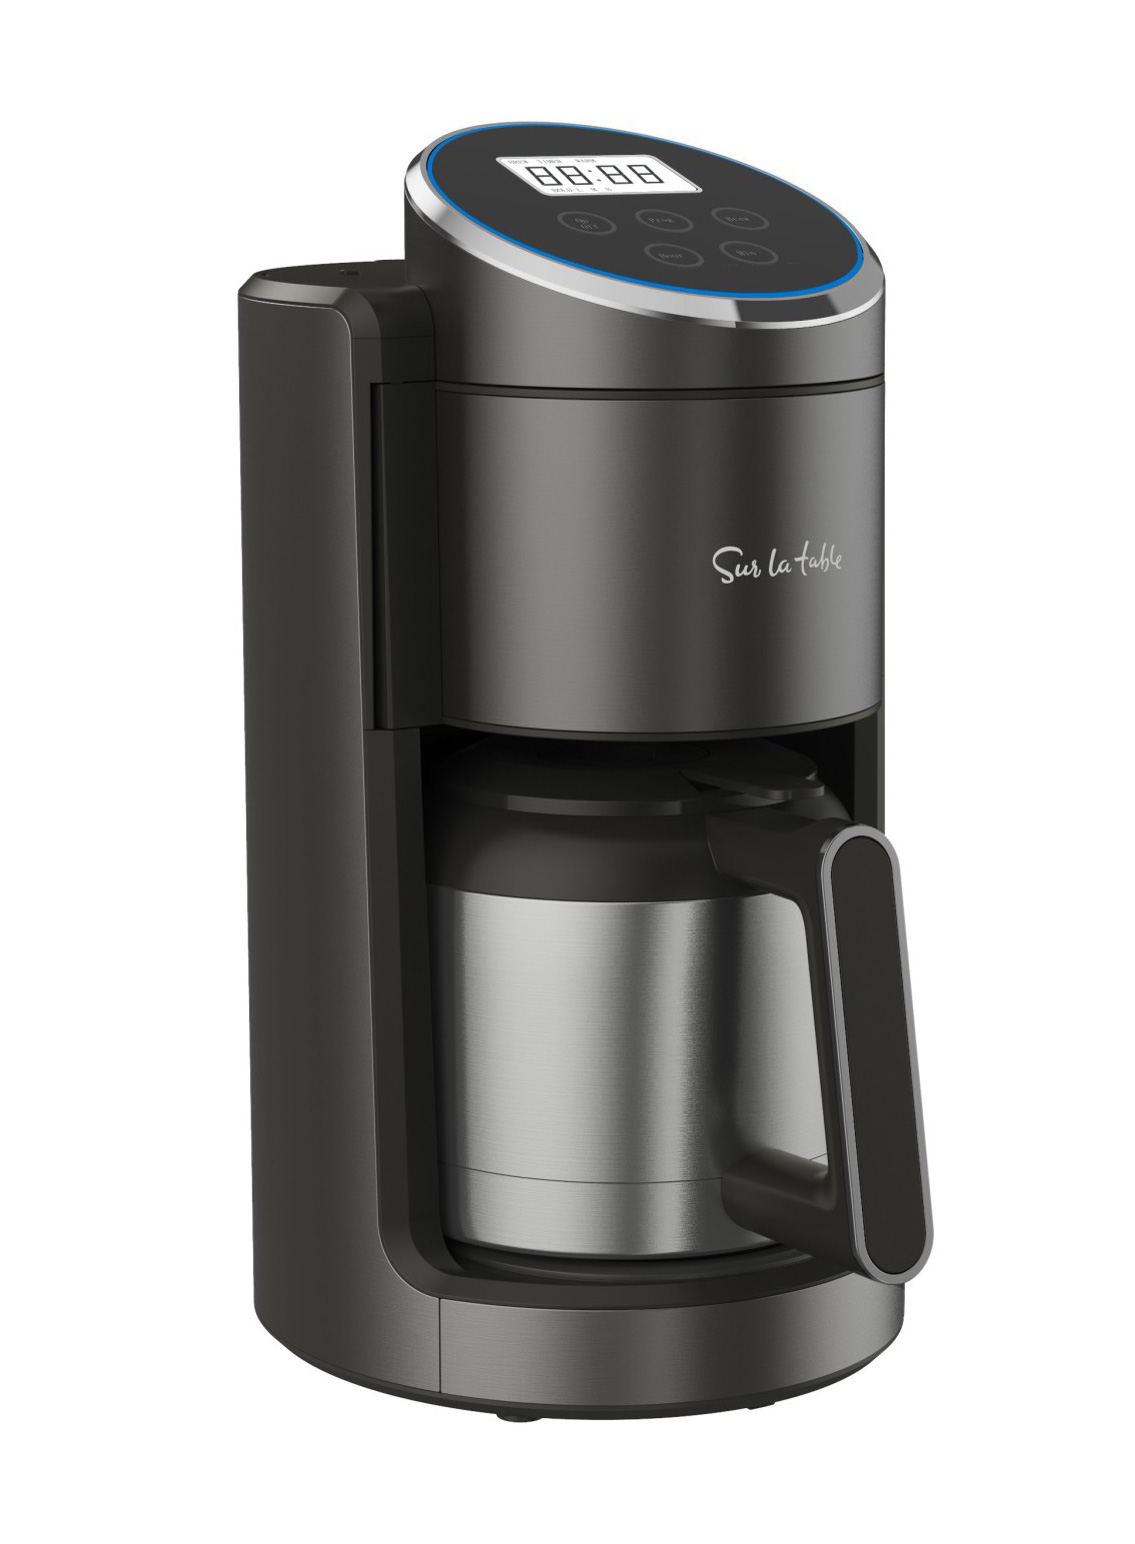 Sur La Table 12 Cup Coffeemaker with Thermal Carafe and Touchscreen Display  Pepper Black SLT-4104 - Best Buy